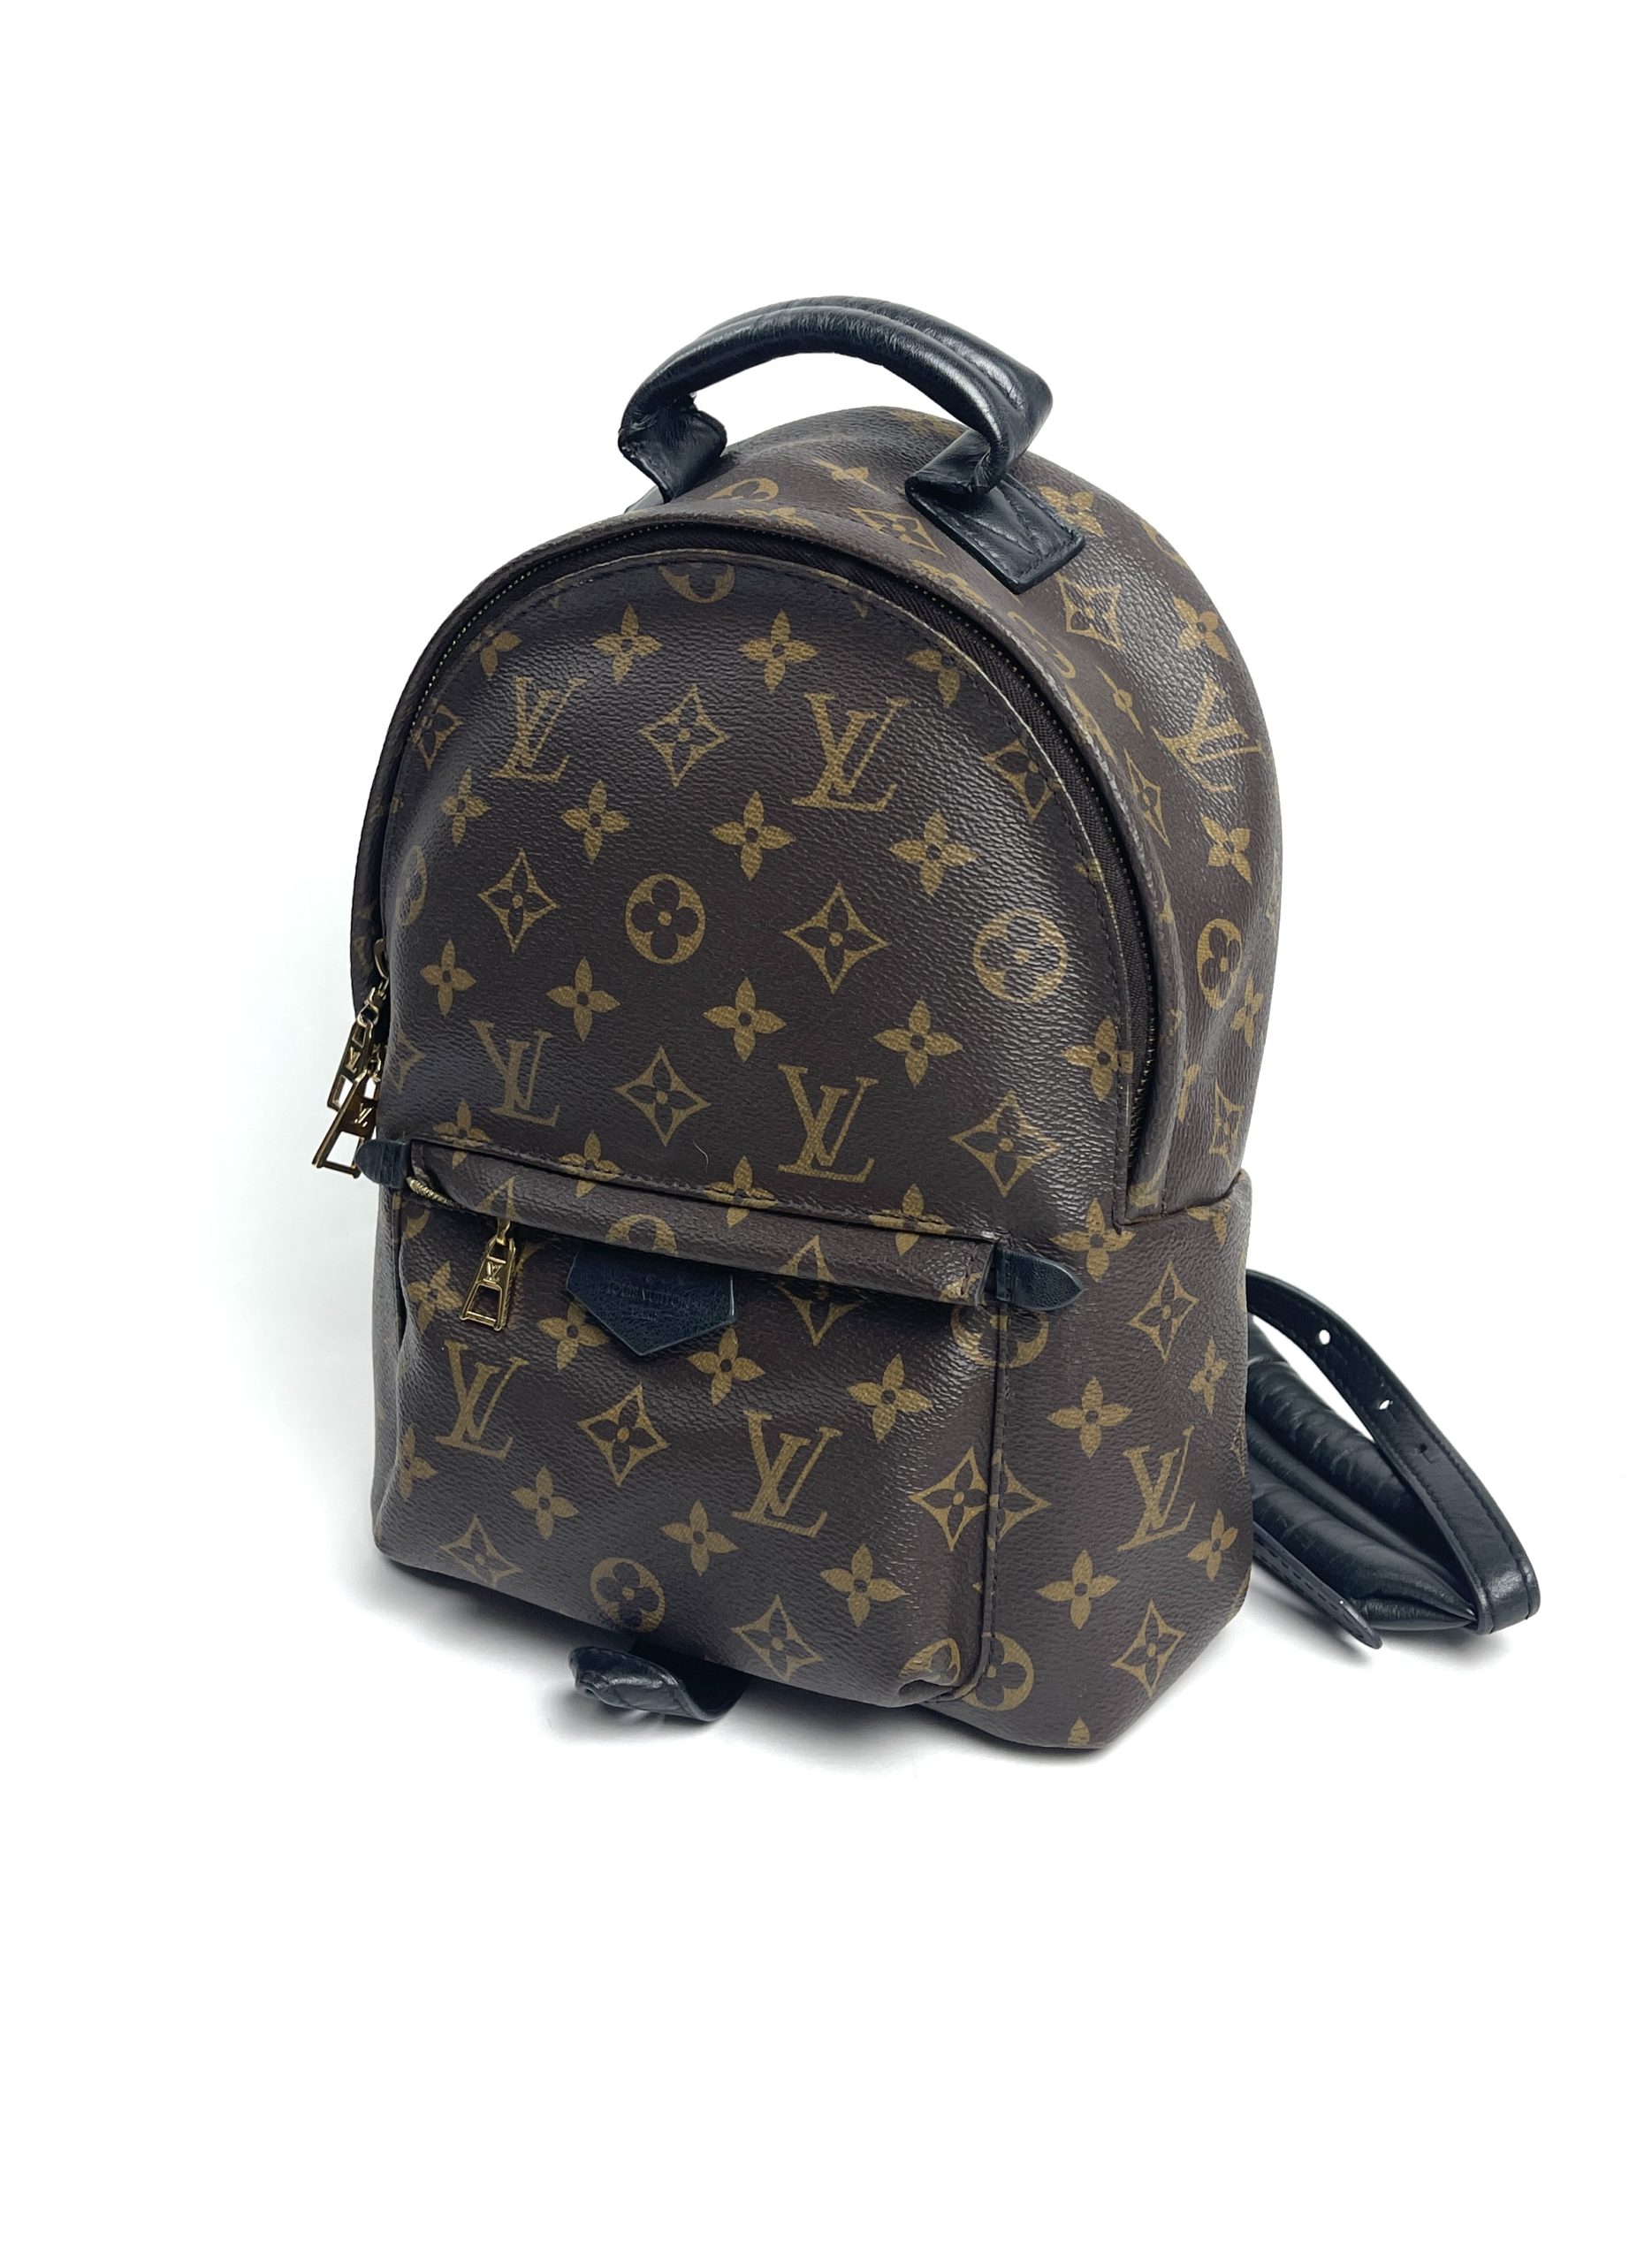 LOUIS VUITTON Palm Springs PM Monogram Black Leather Backpack  eBay